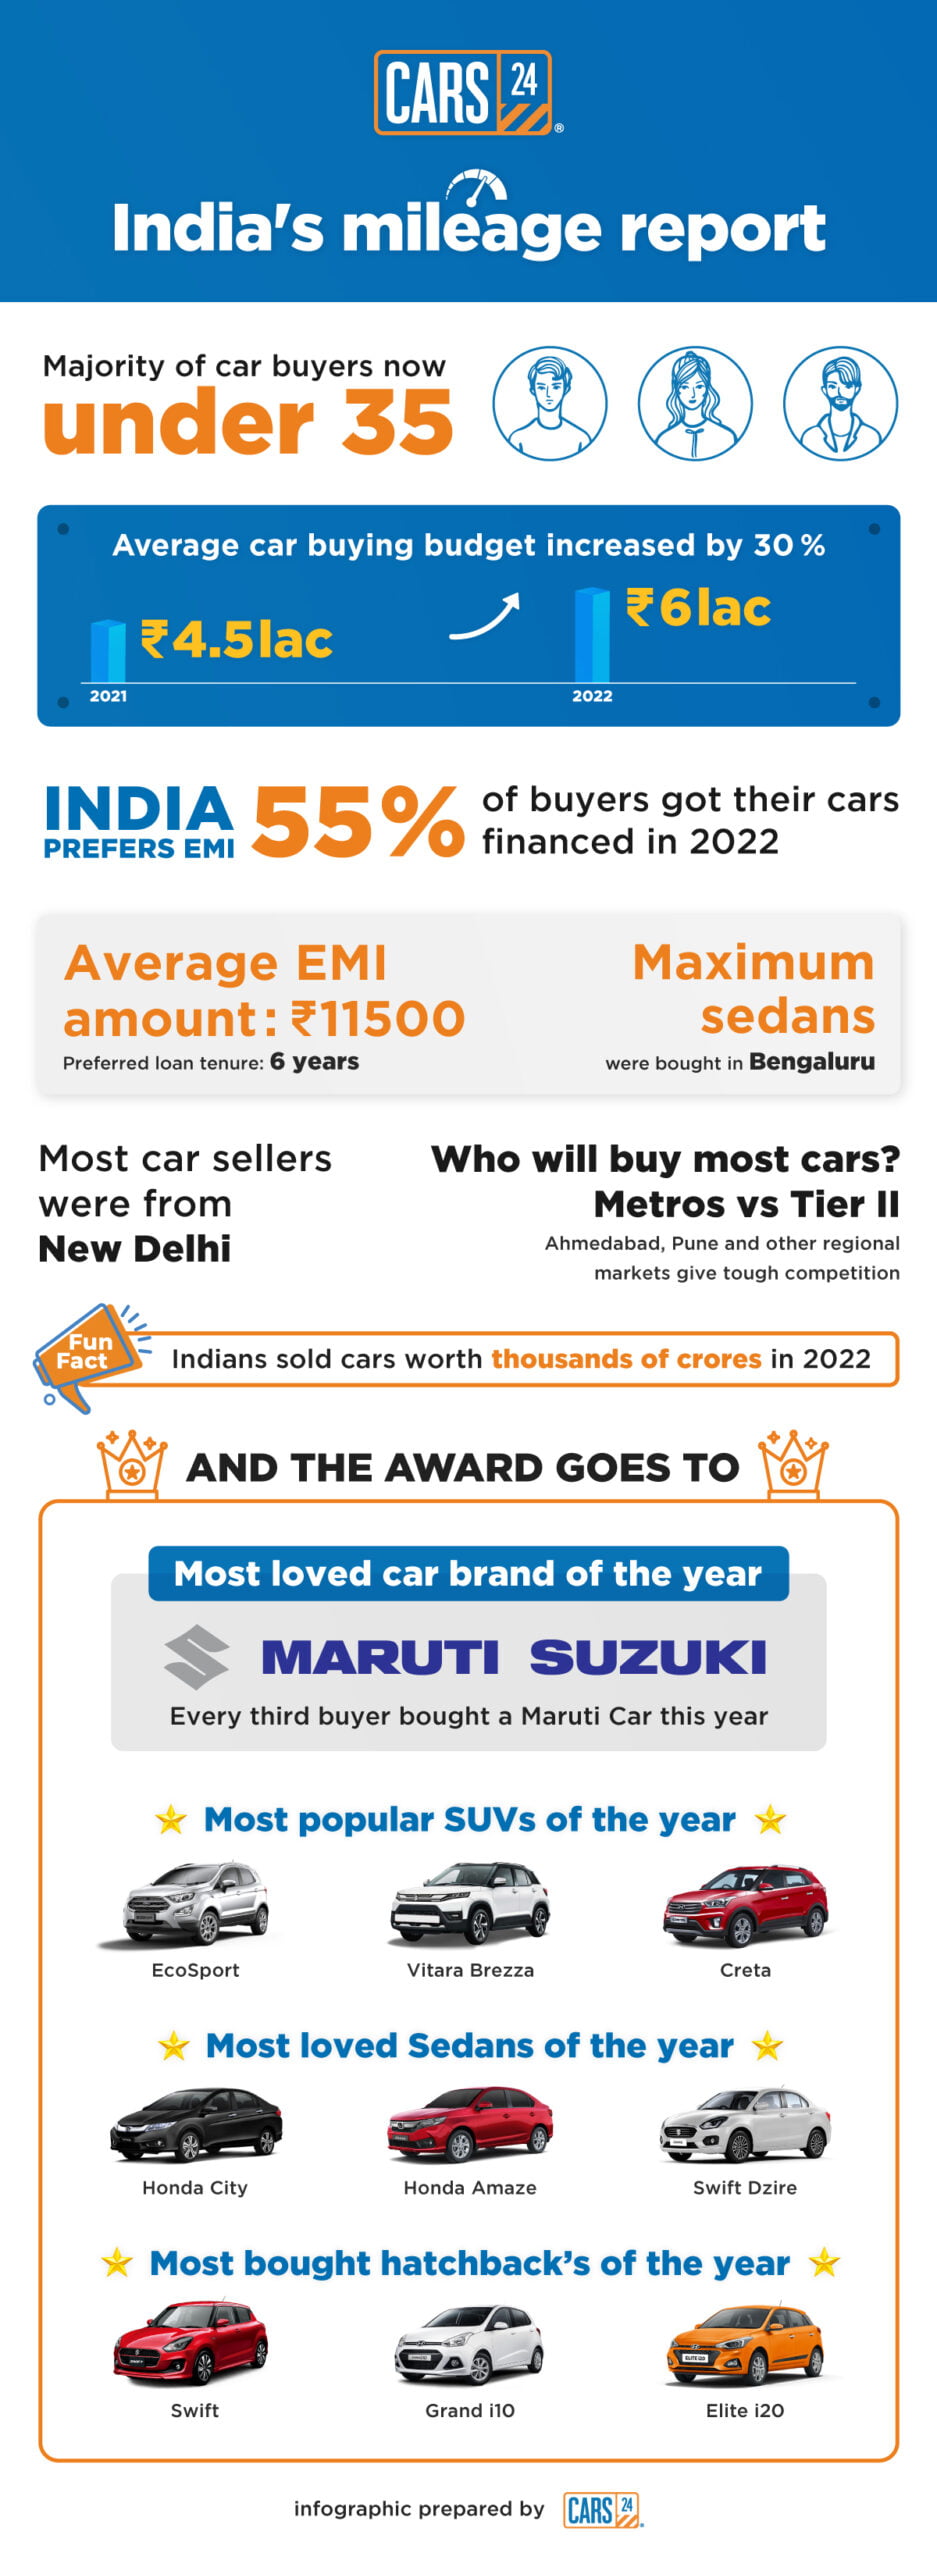 India’s Car Buying Budget Increases by 30% - Cars24 Leads As A Platform (2)